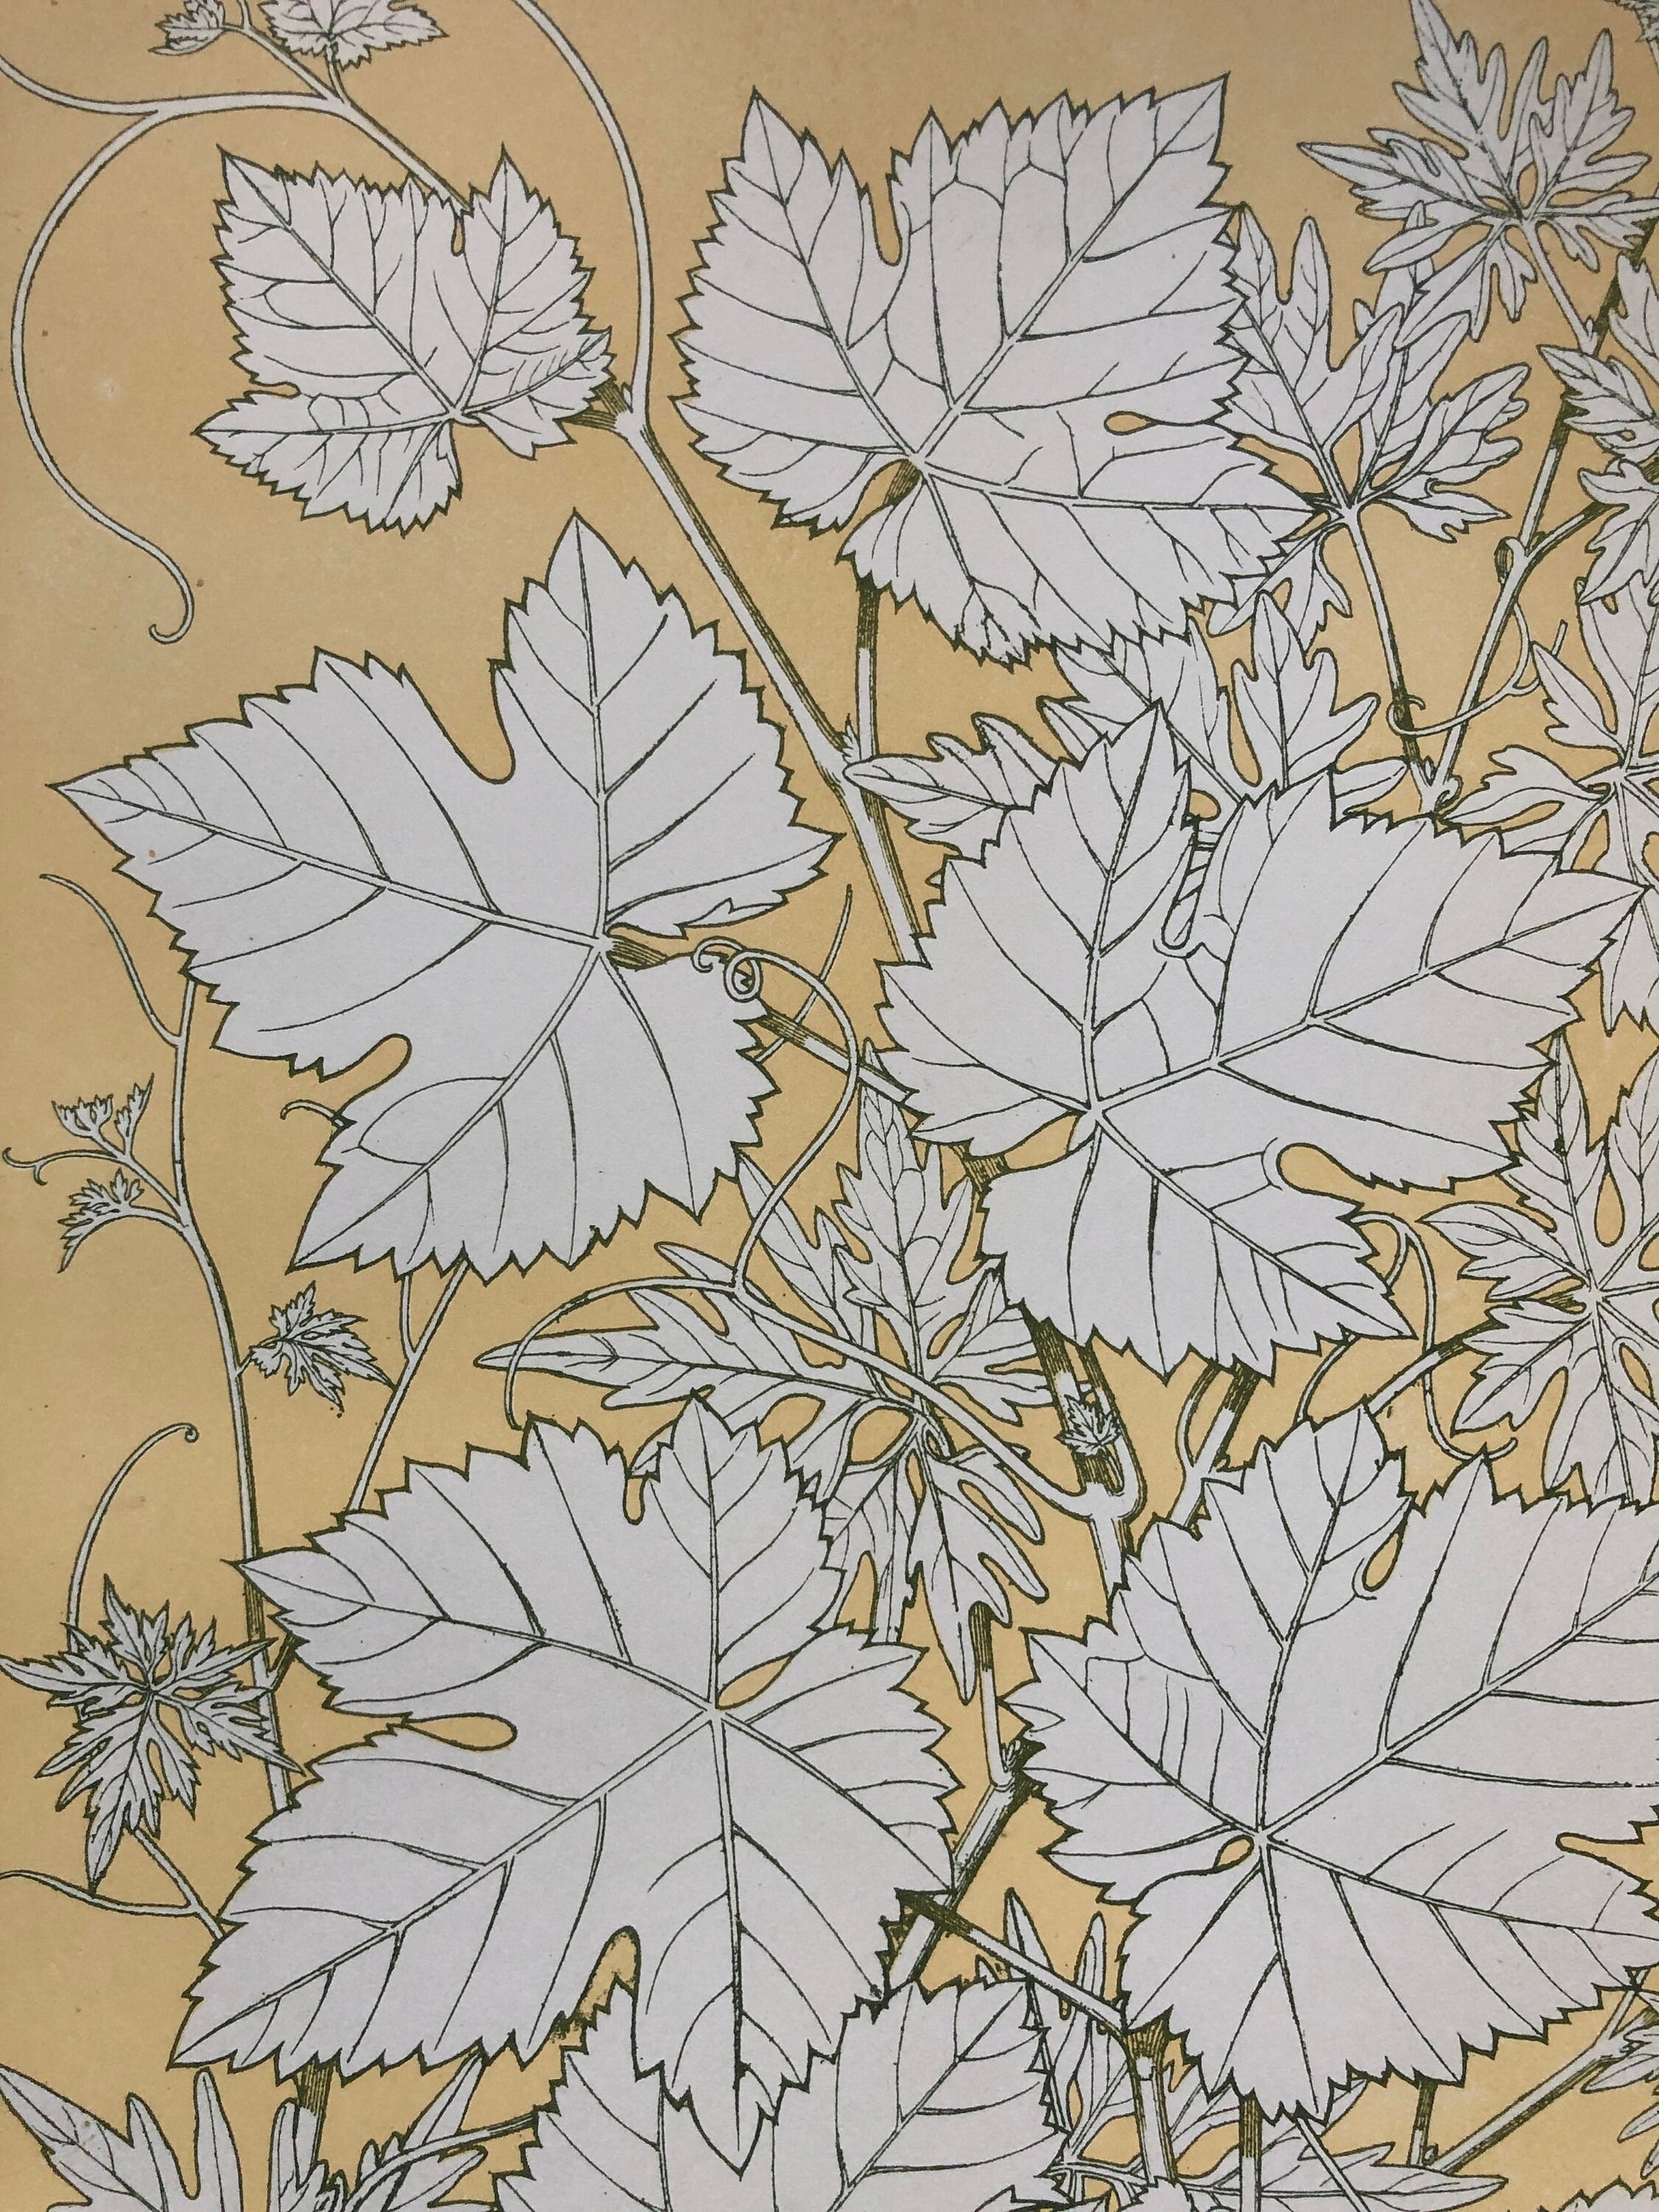 Vine Leaves. Leaves From Nature No 2. An Original Plate From The Grammar of Ornament by Owen Jones (1809 - 68). Size: 33 x 23 cms.